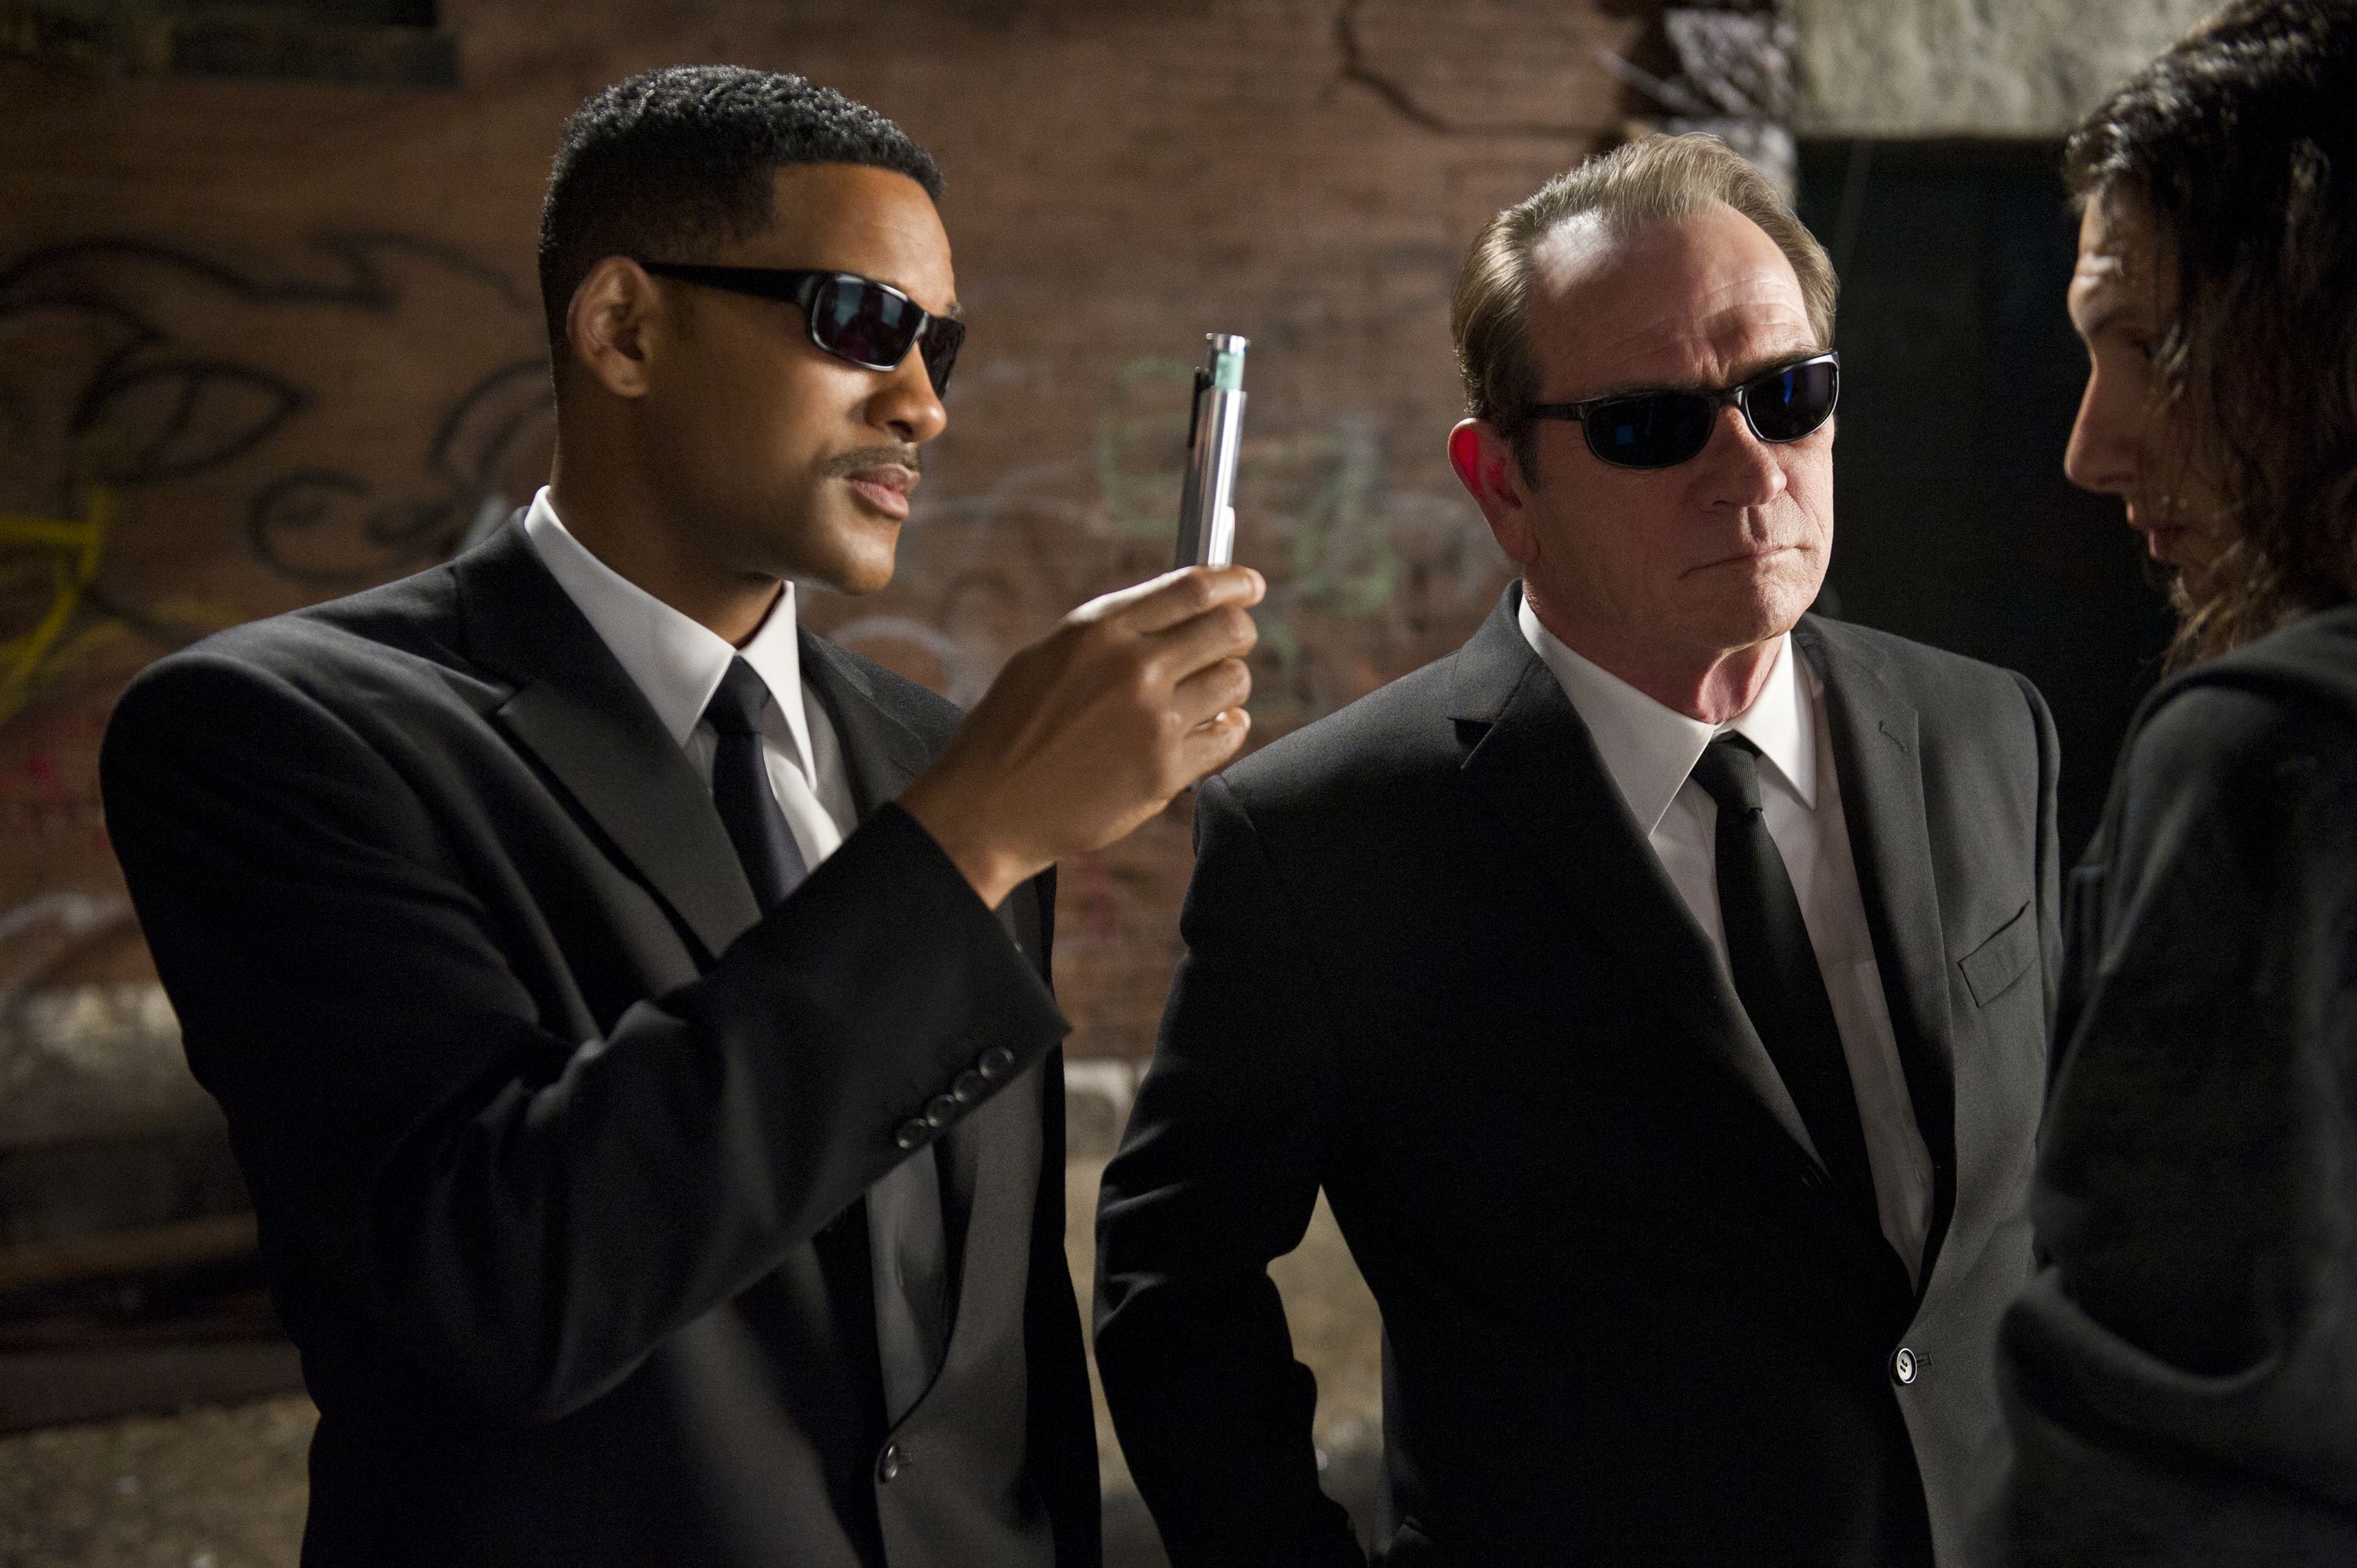 MEN IN BLACK 3 Image Featuring Will Smith and Tommy Lee Jones